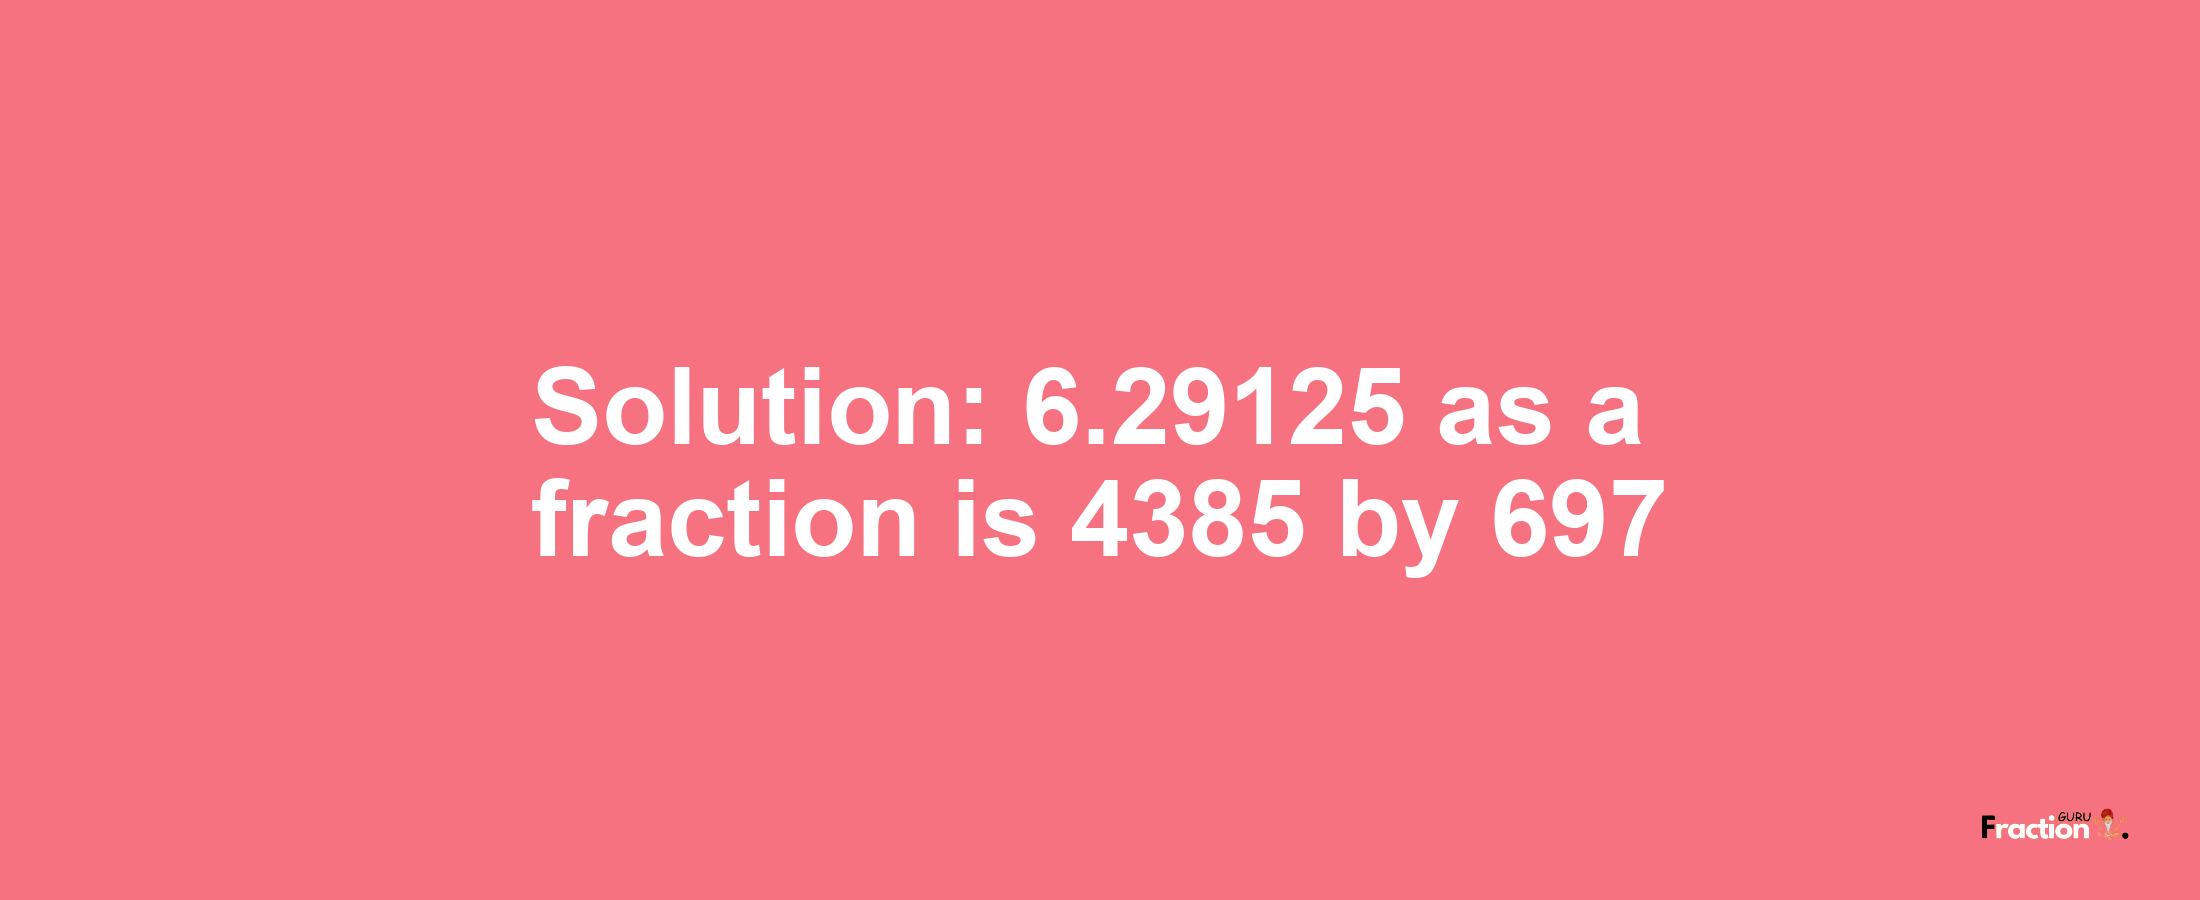 Solution:6.29125 as a fraction is 4385/697